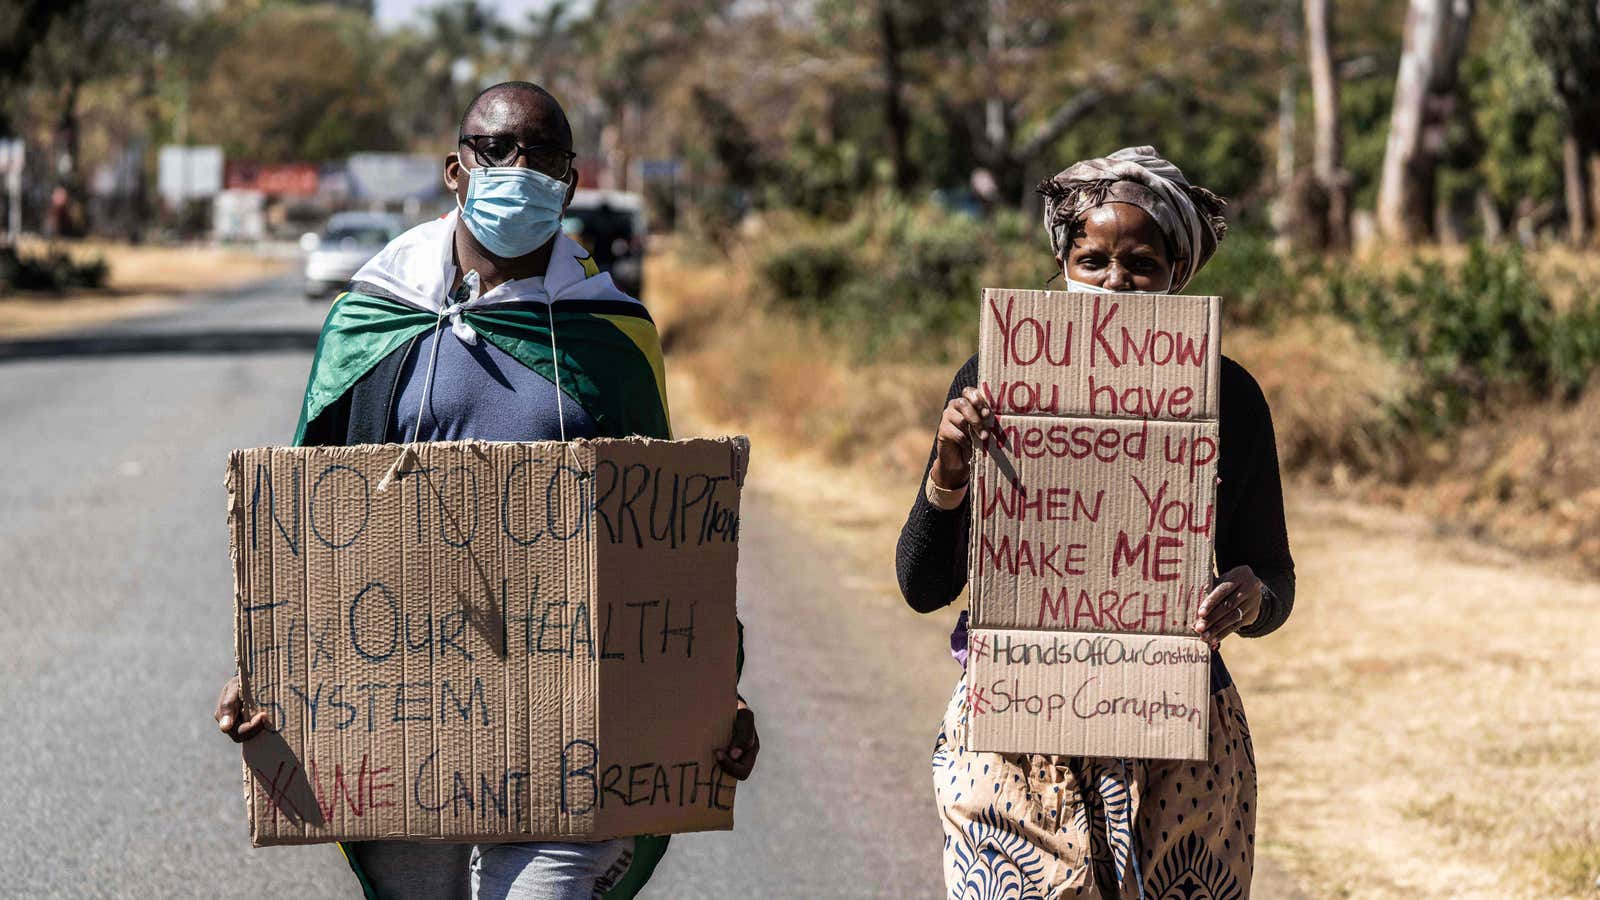 An anti-corruption protest march in Harare last July. The Black Lives Matter protest movement in the US reverberated through Zimbabwe last year, and continues to have impact.